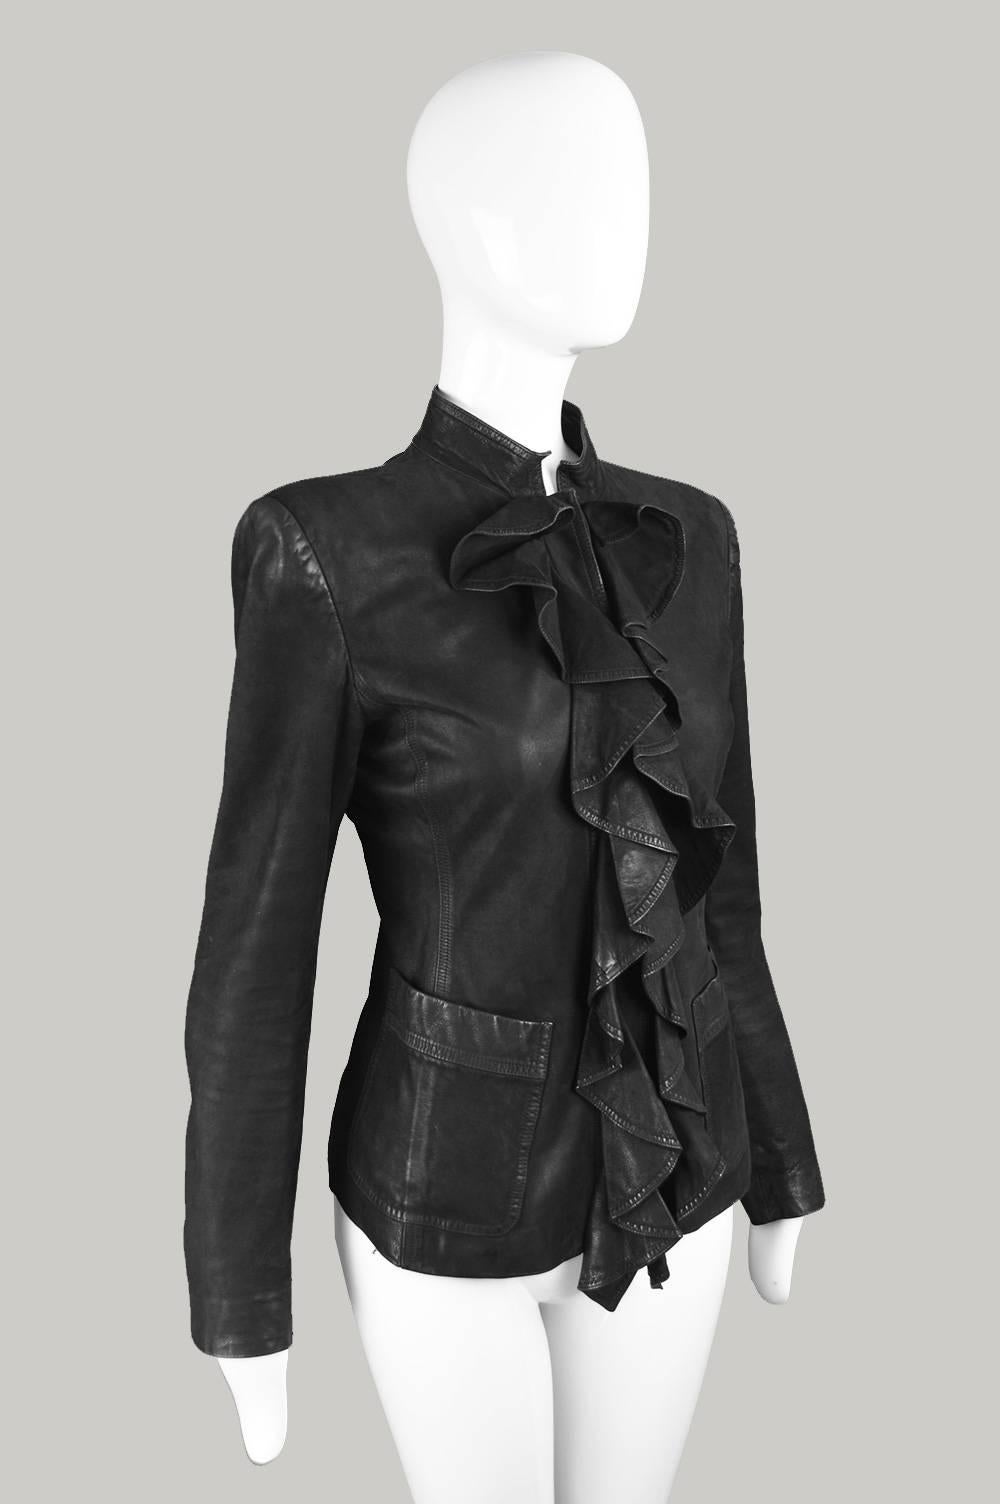 Tom Ford for Yves Saint Laurent Black Draped Ruffle Leather Jacket , Fall 2003 2